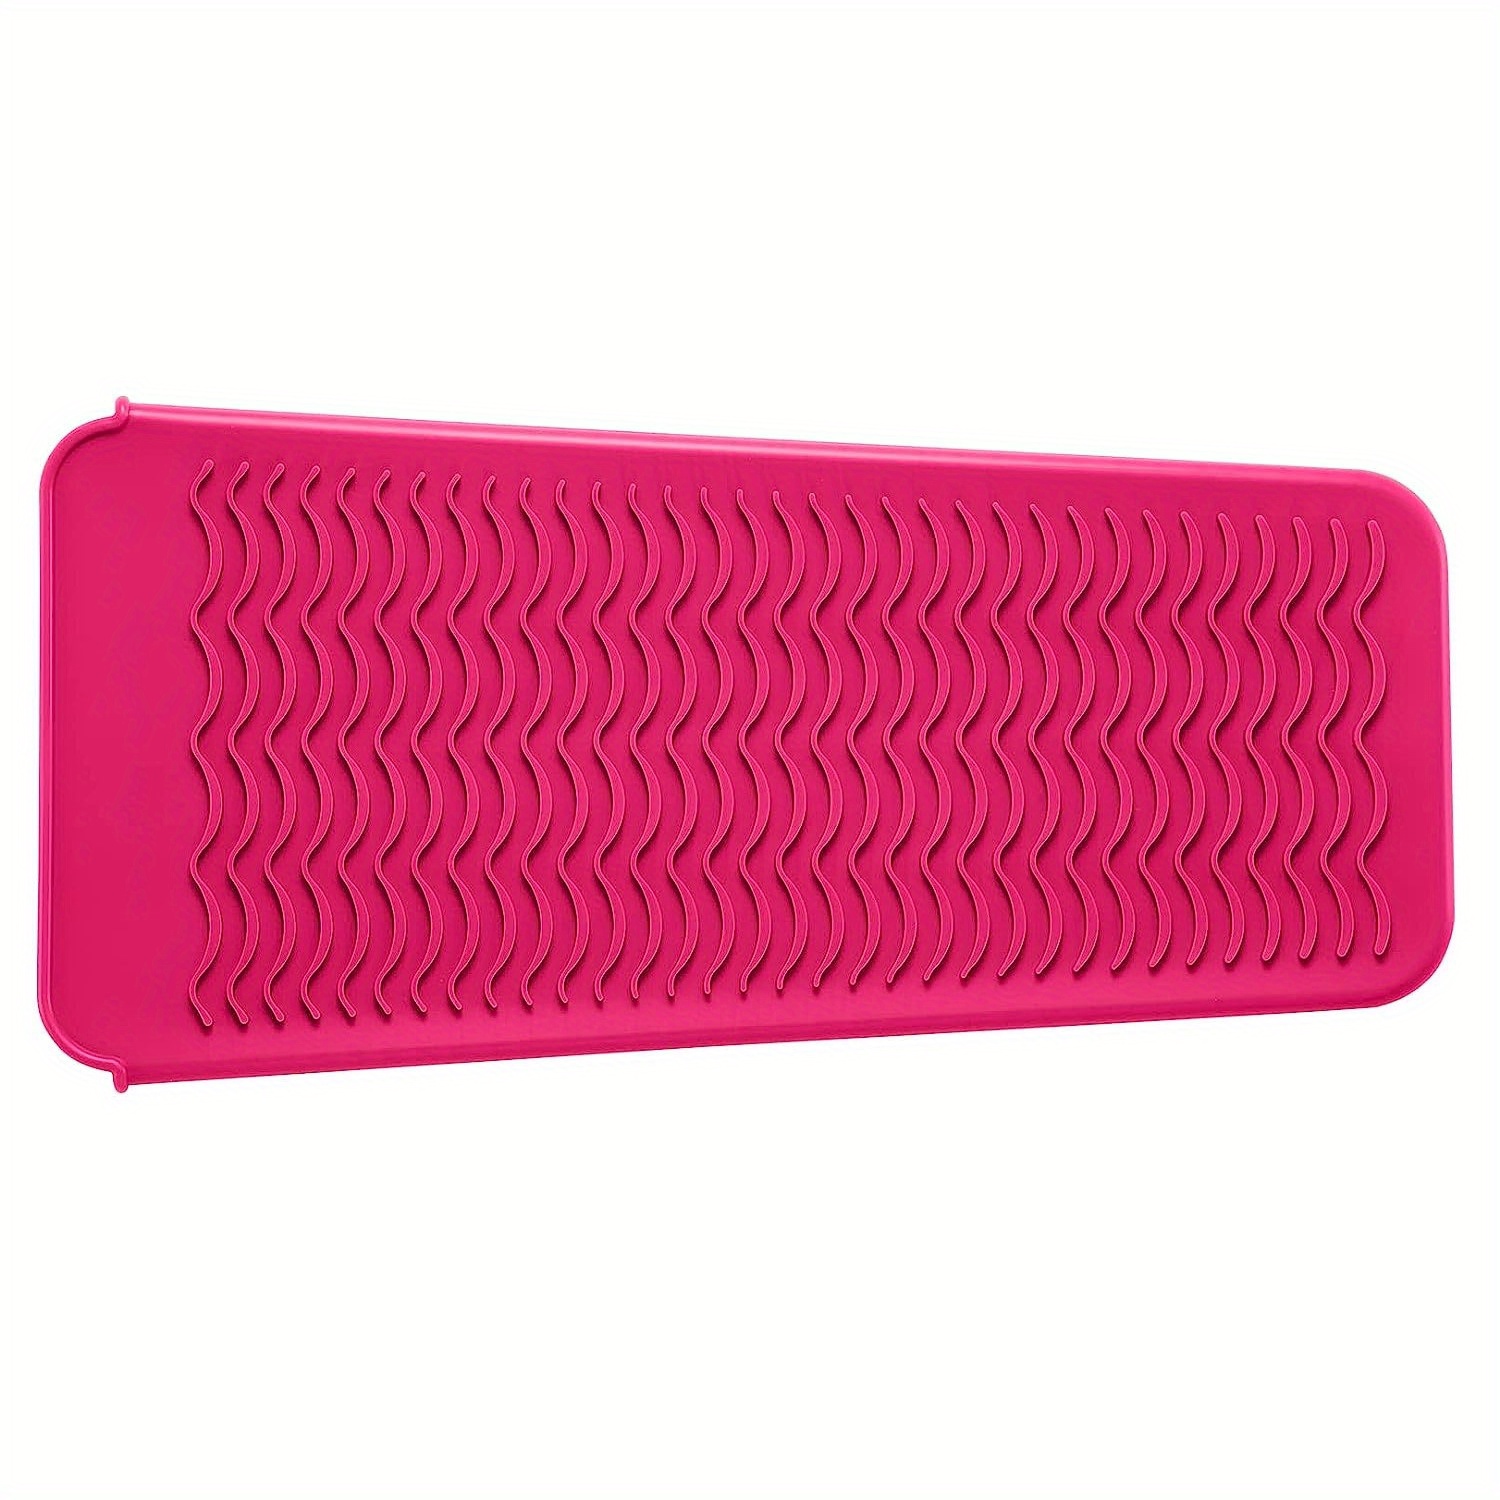 EIOKIT Silicone Heat Resistant Travel Mat Pouch for Hair  Straightener,Crimping Iron,Hair Curling Iron,Hair Curling Wand,Flat Iro